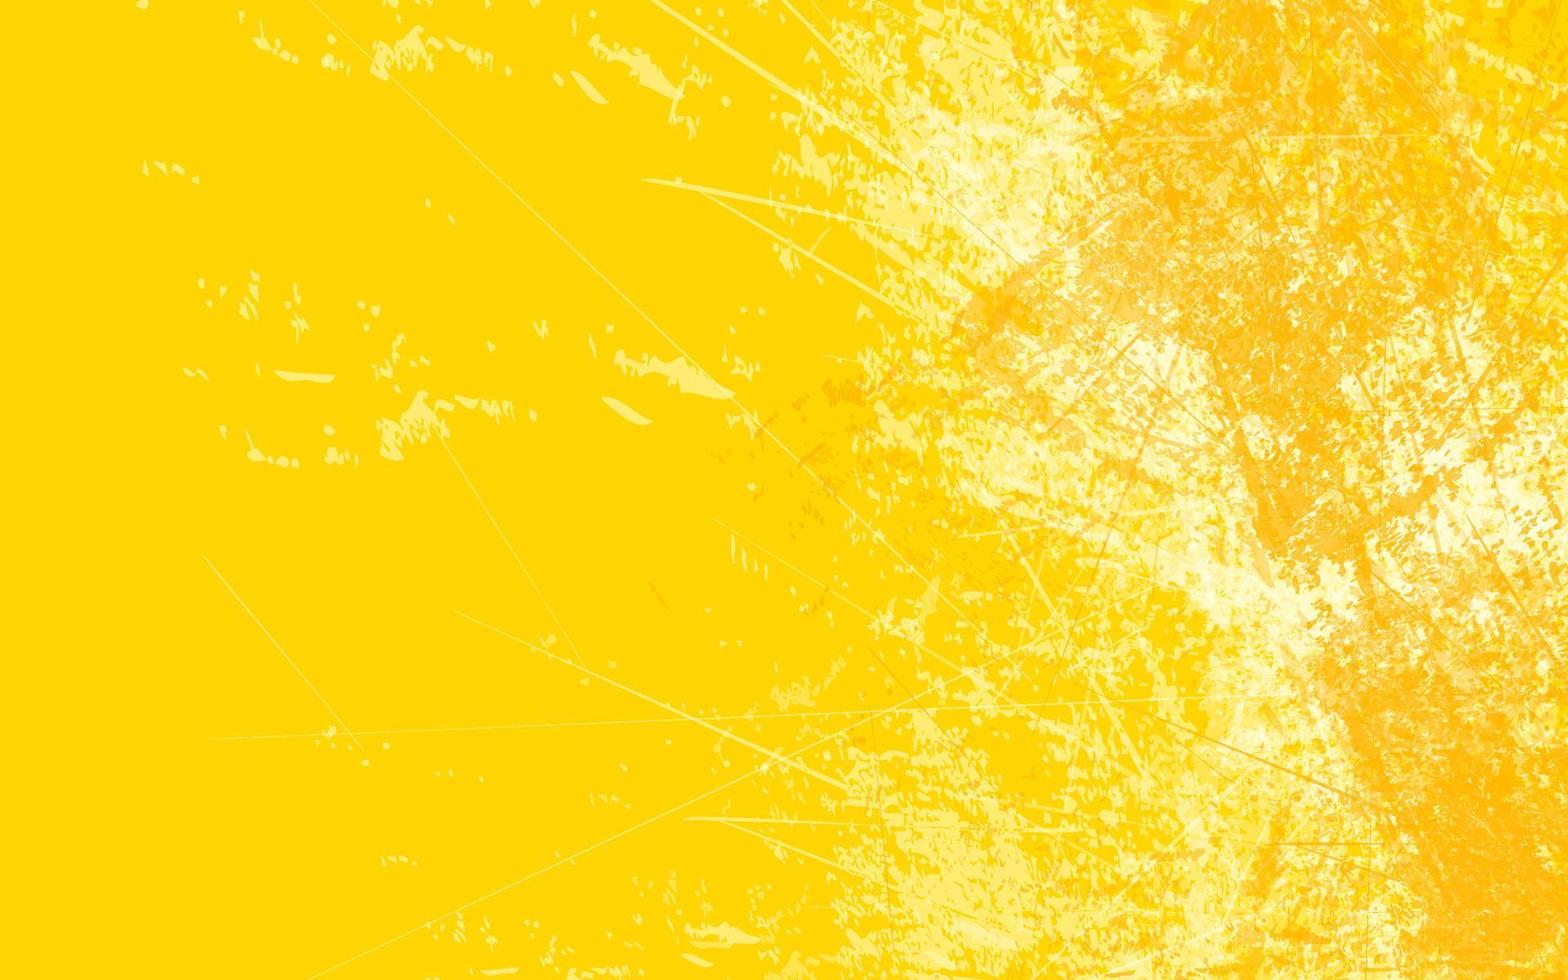 Abstract grunge texture yellow color splash paint background vector